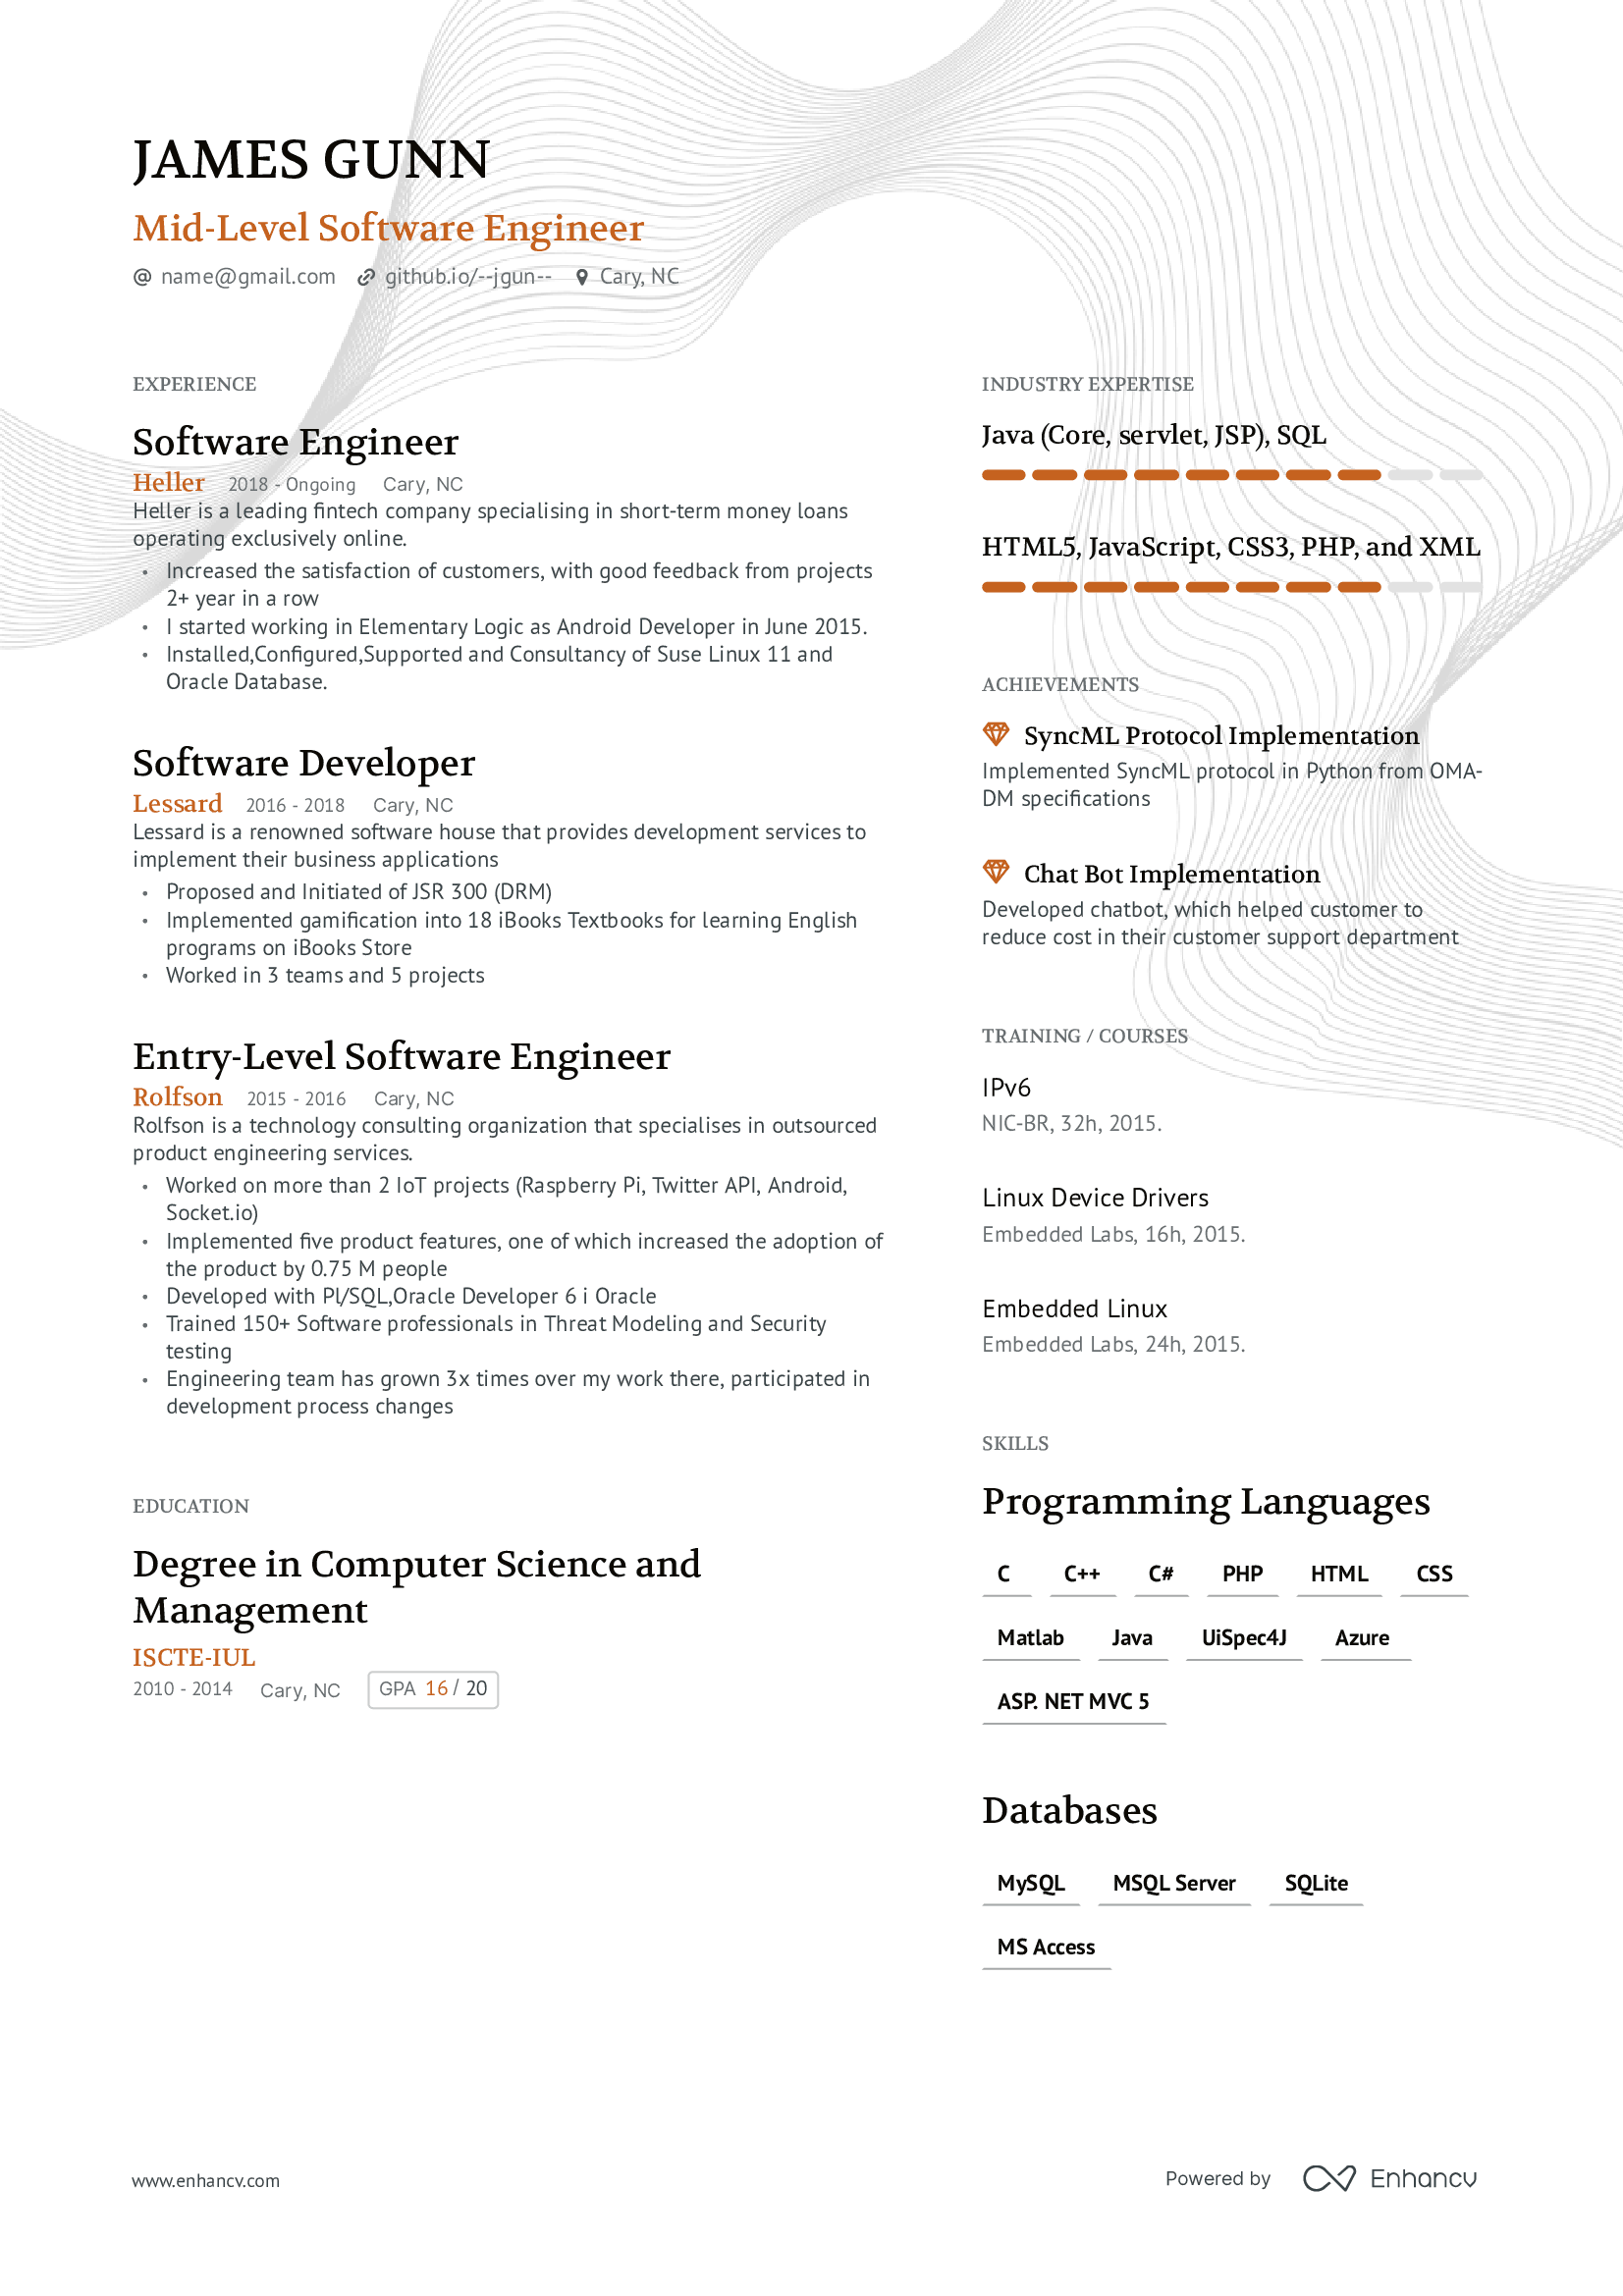 Mid level software engineer resume.png